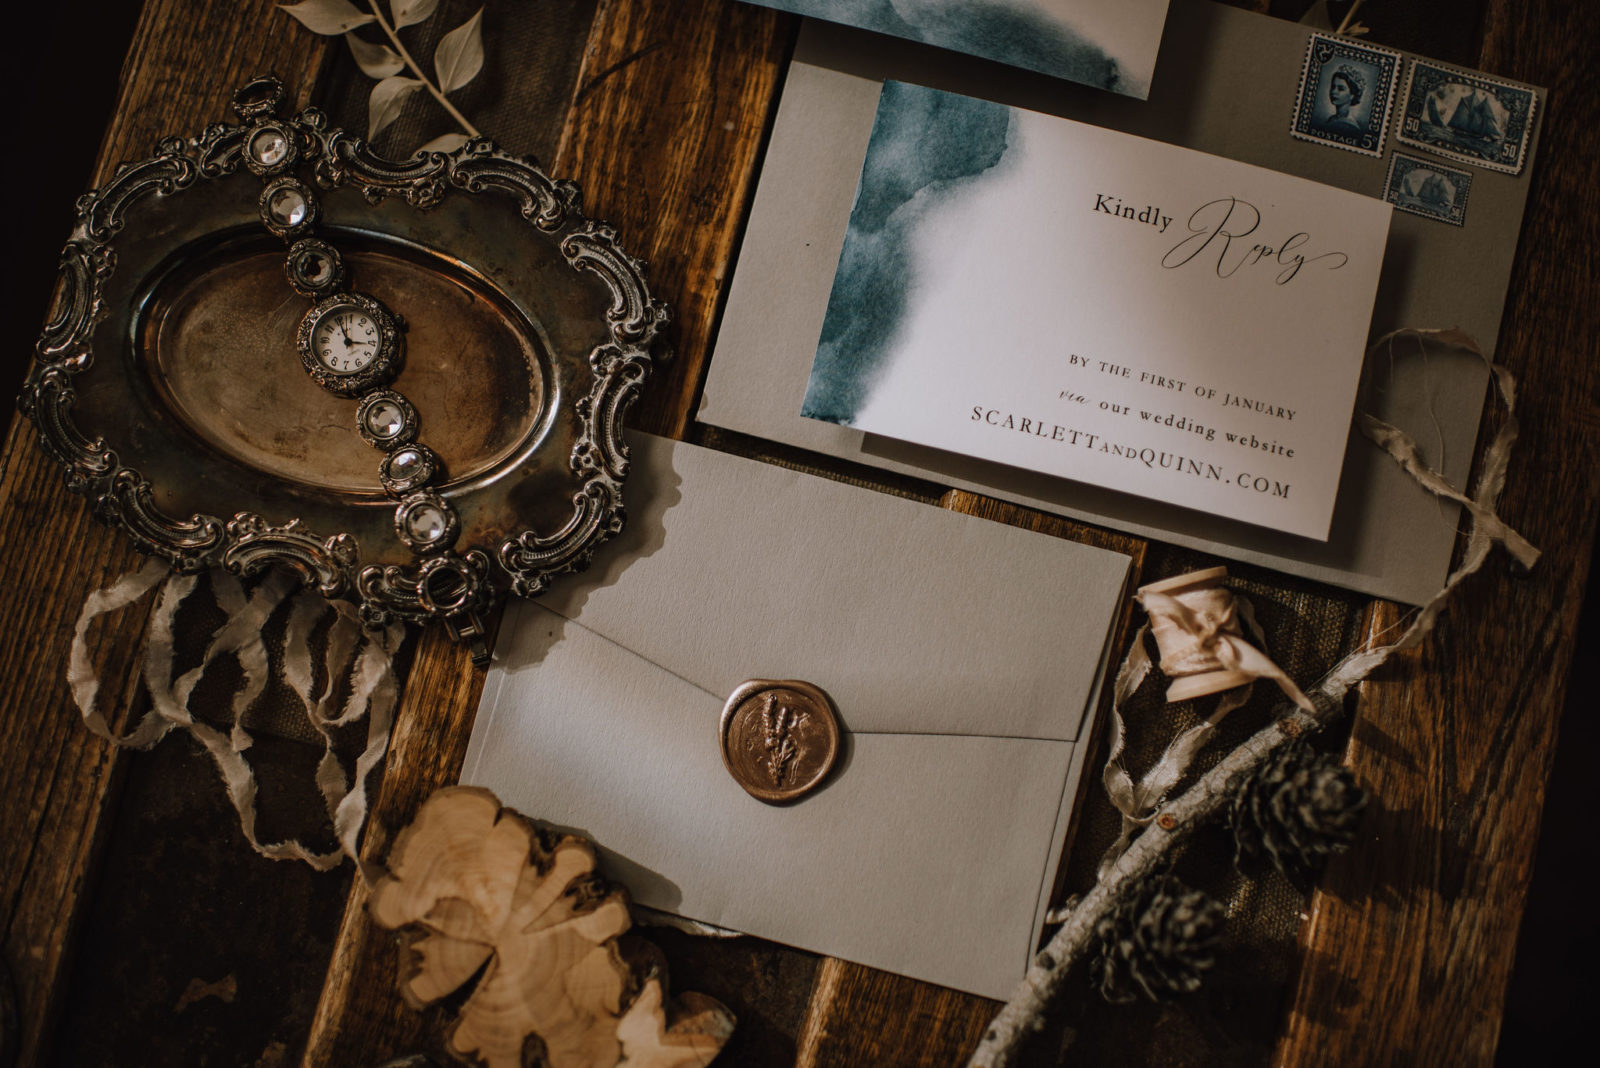 Heirloom inspired wedding decor with vintage stationery inspiration and an antique silver watch